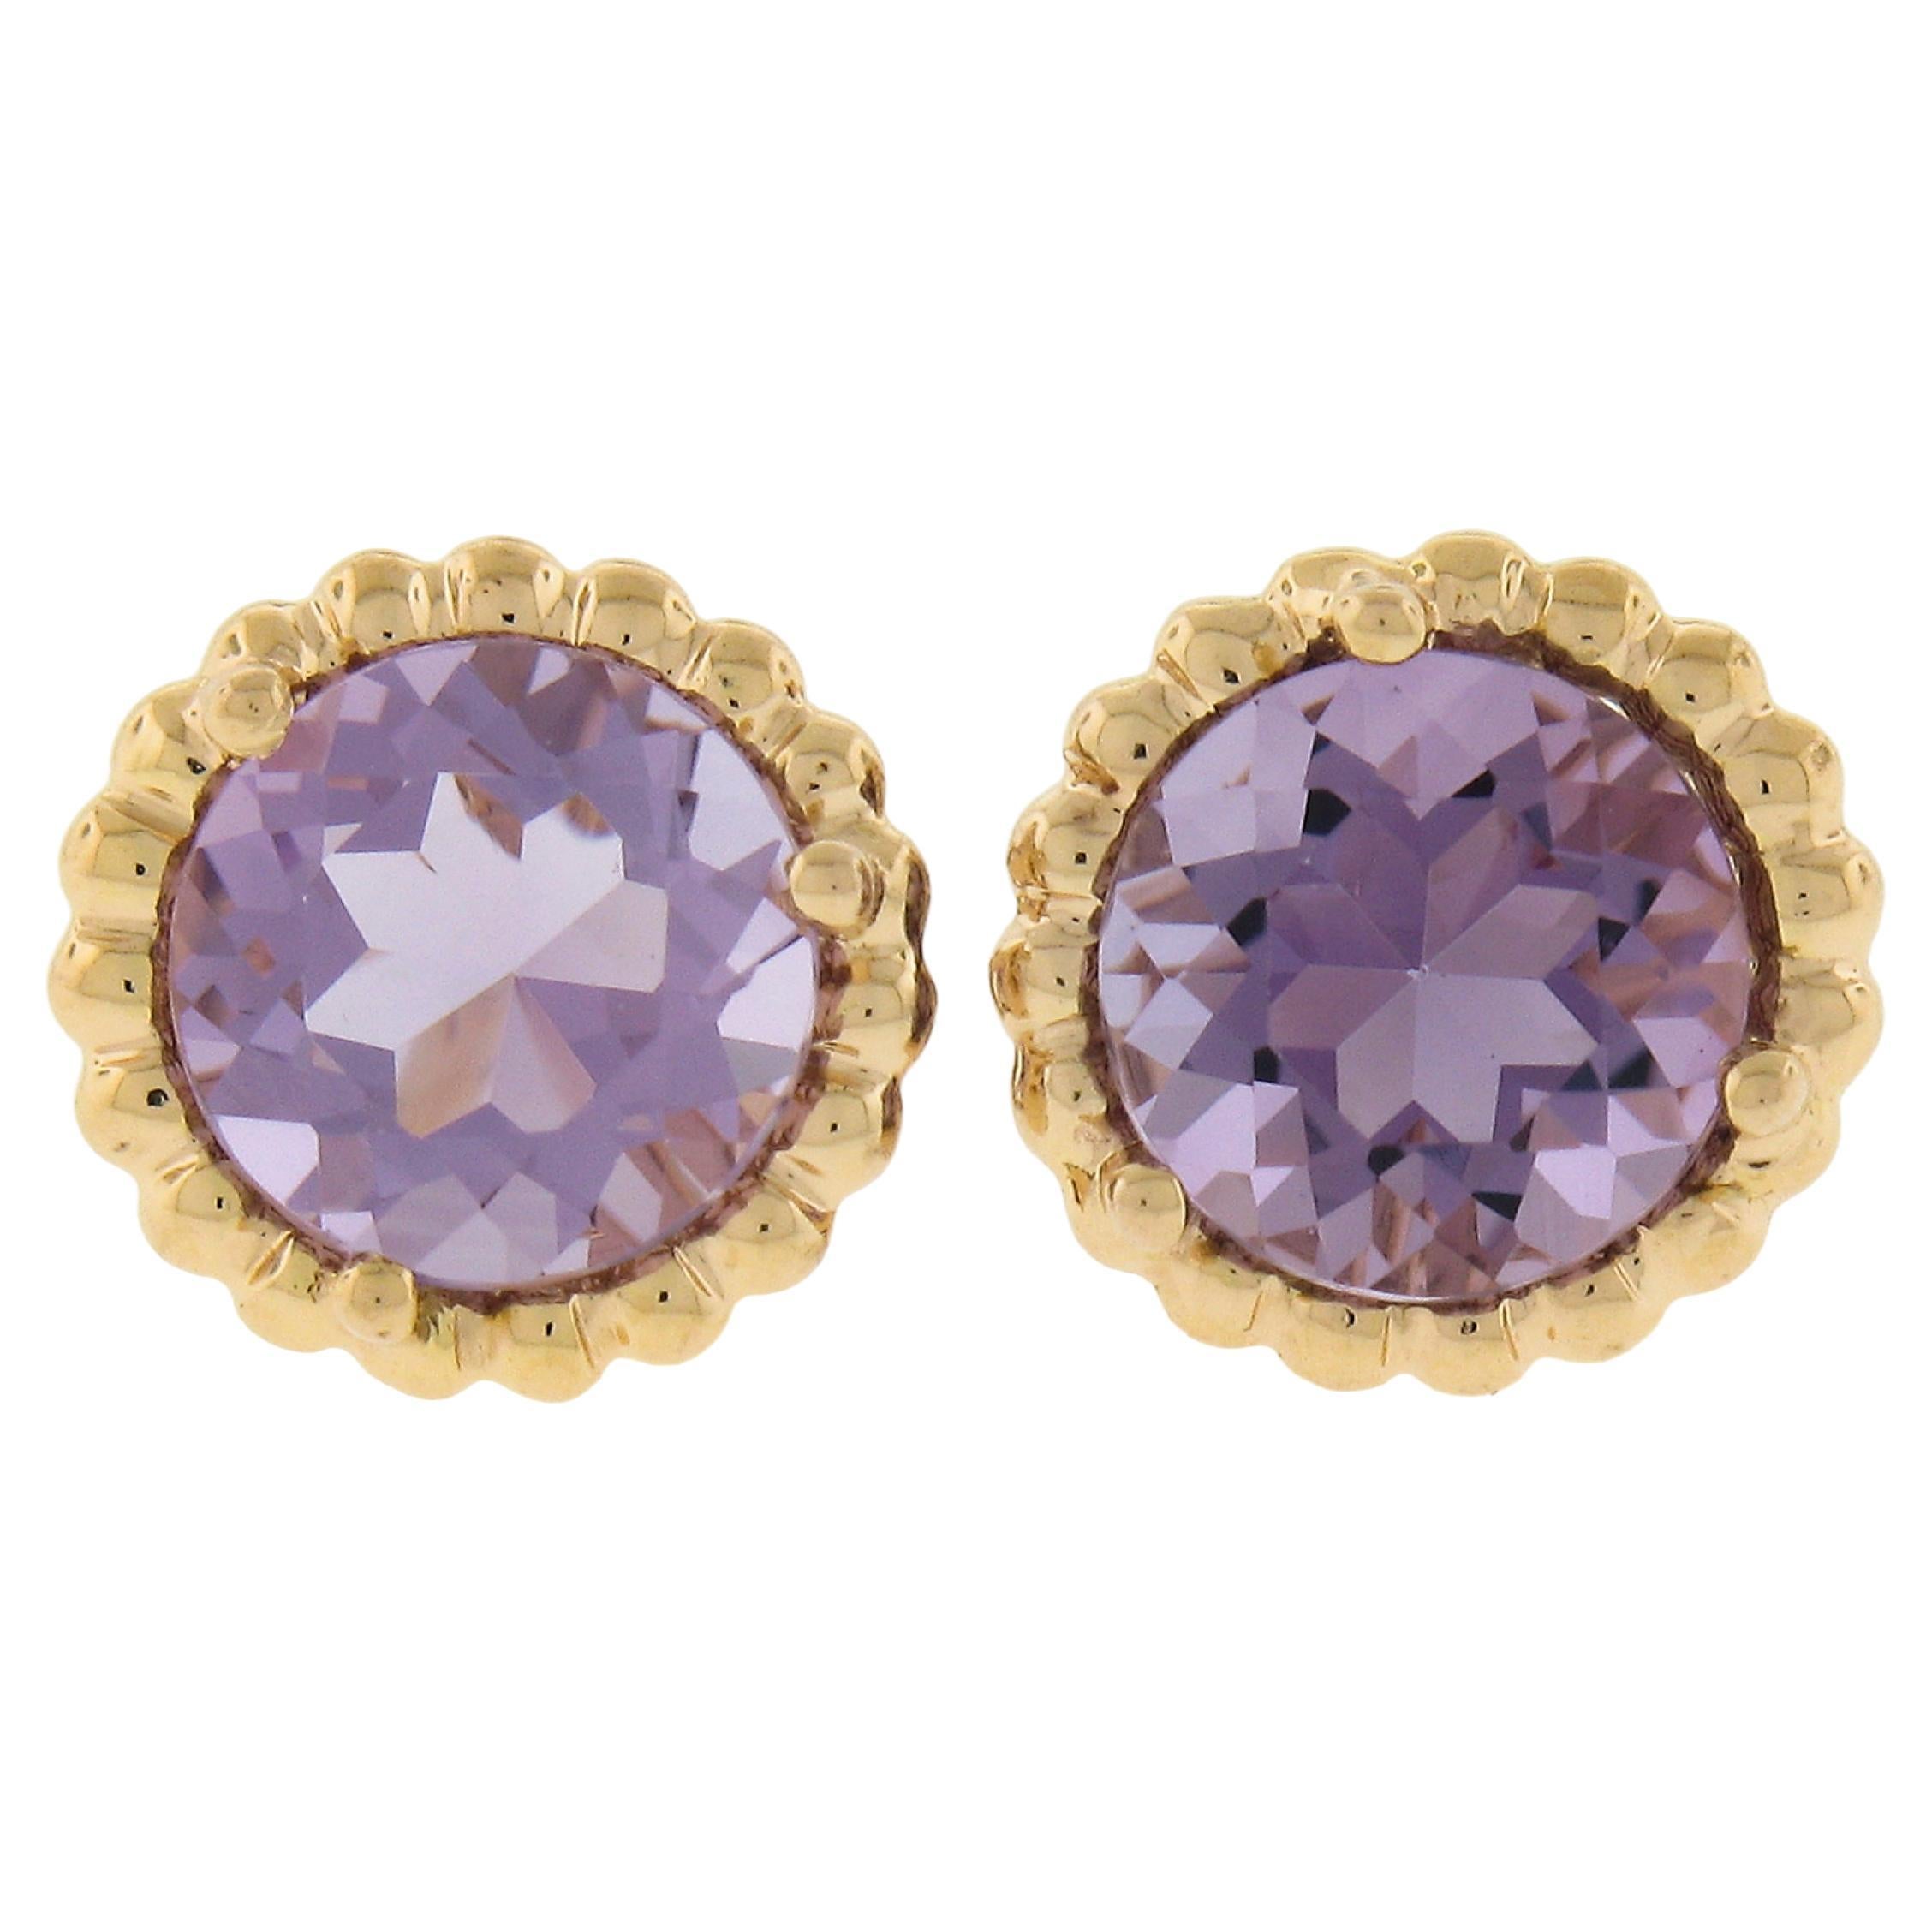 Tiffany & Co. 18K Yellow Gold Round Amethyst Solitaire Bead Frame Stud Earrings